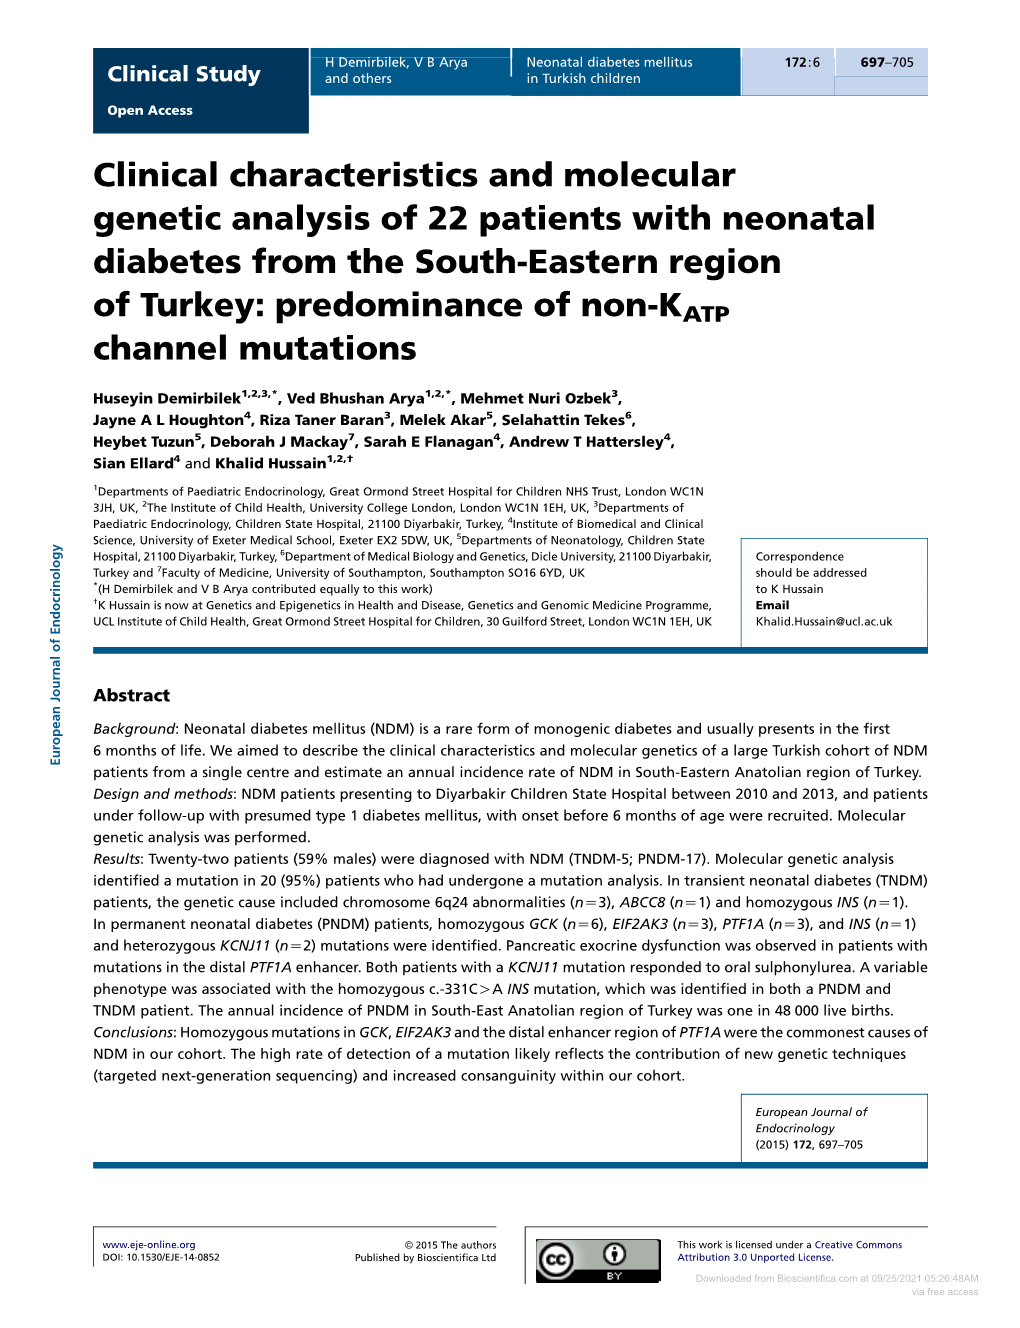 Clinical Characteristics and Molecular Genetic Analysis of 22 Patients with Neonatal Diabetes from the South-Eastern Region of T